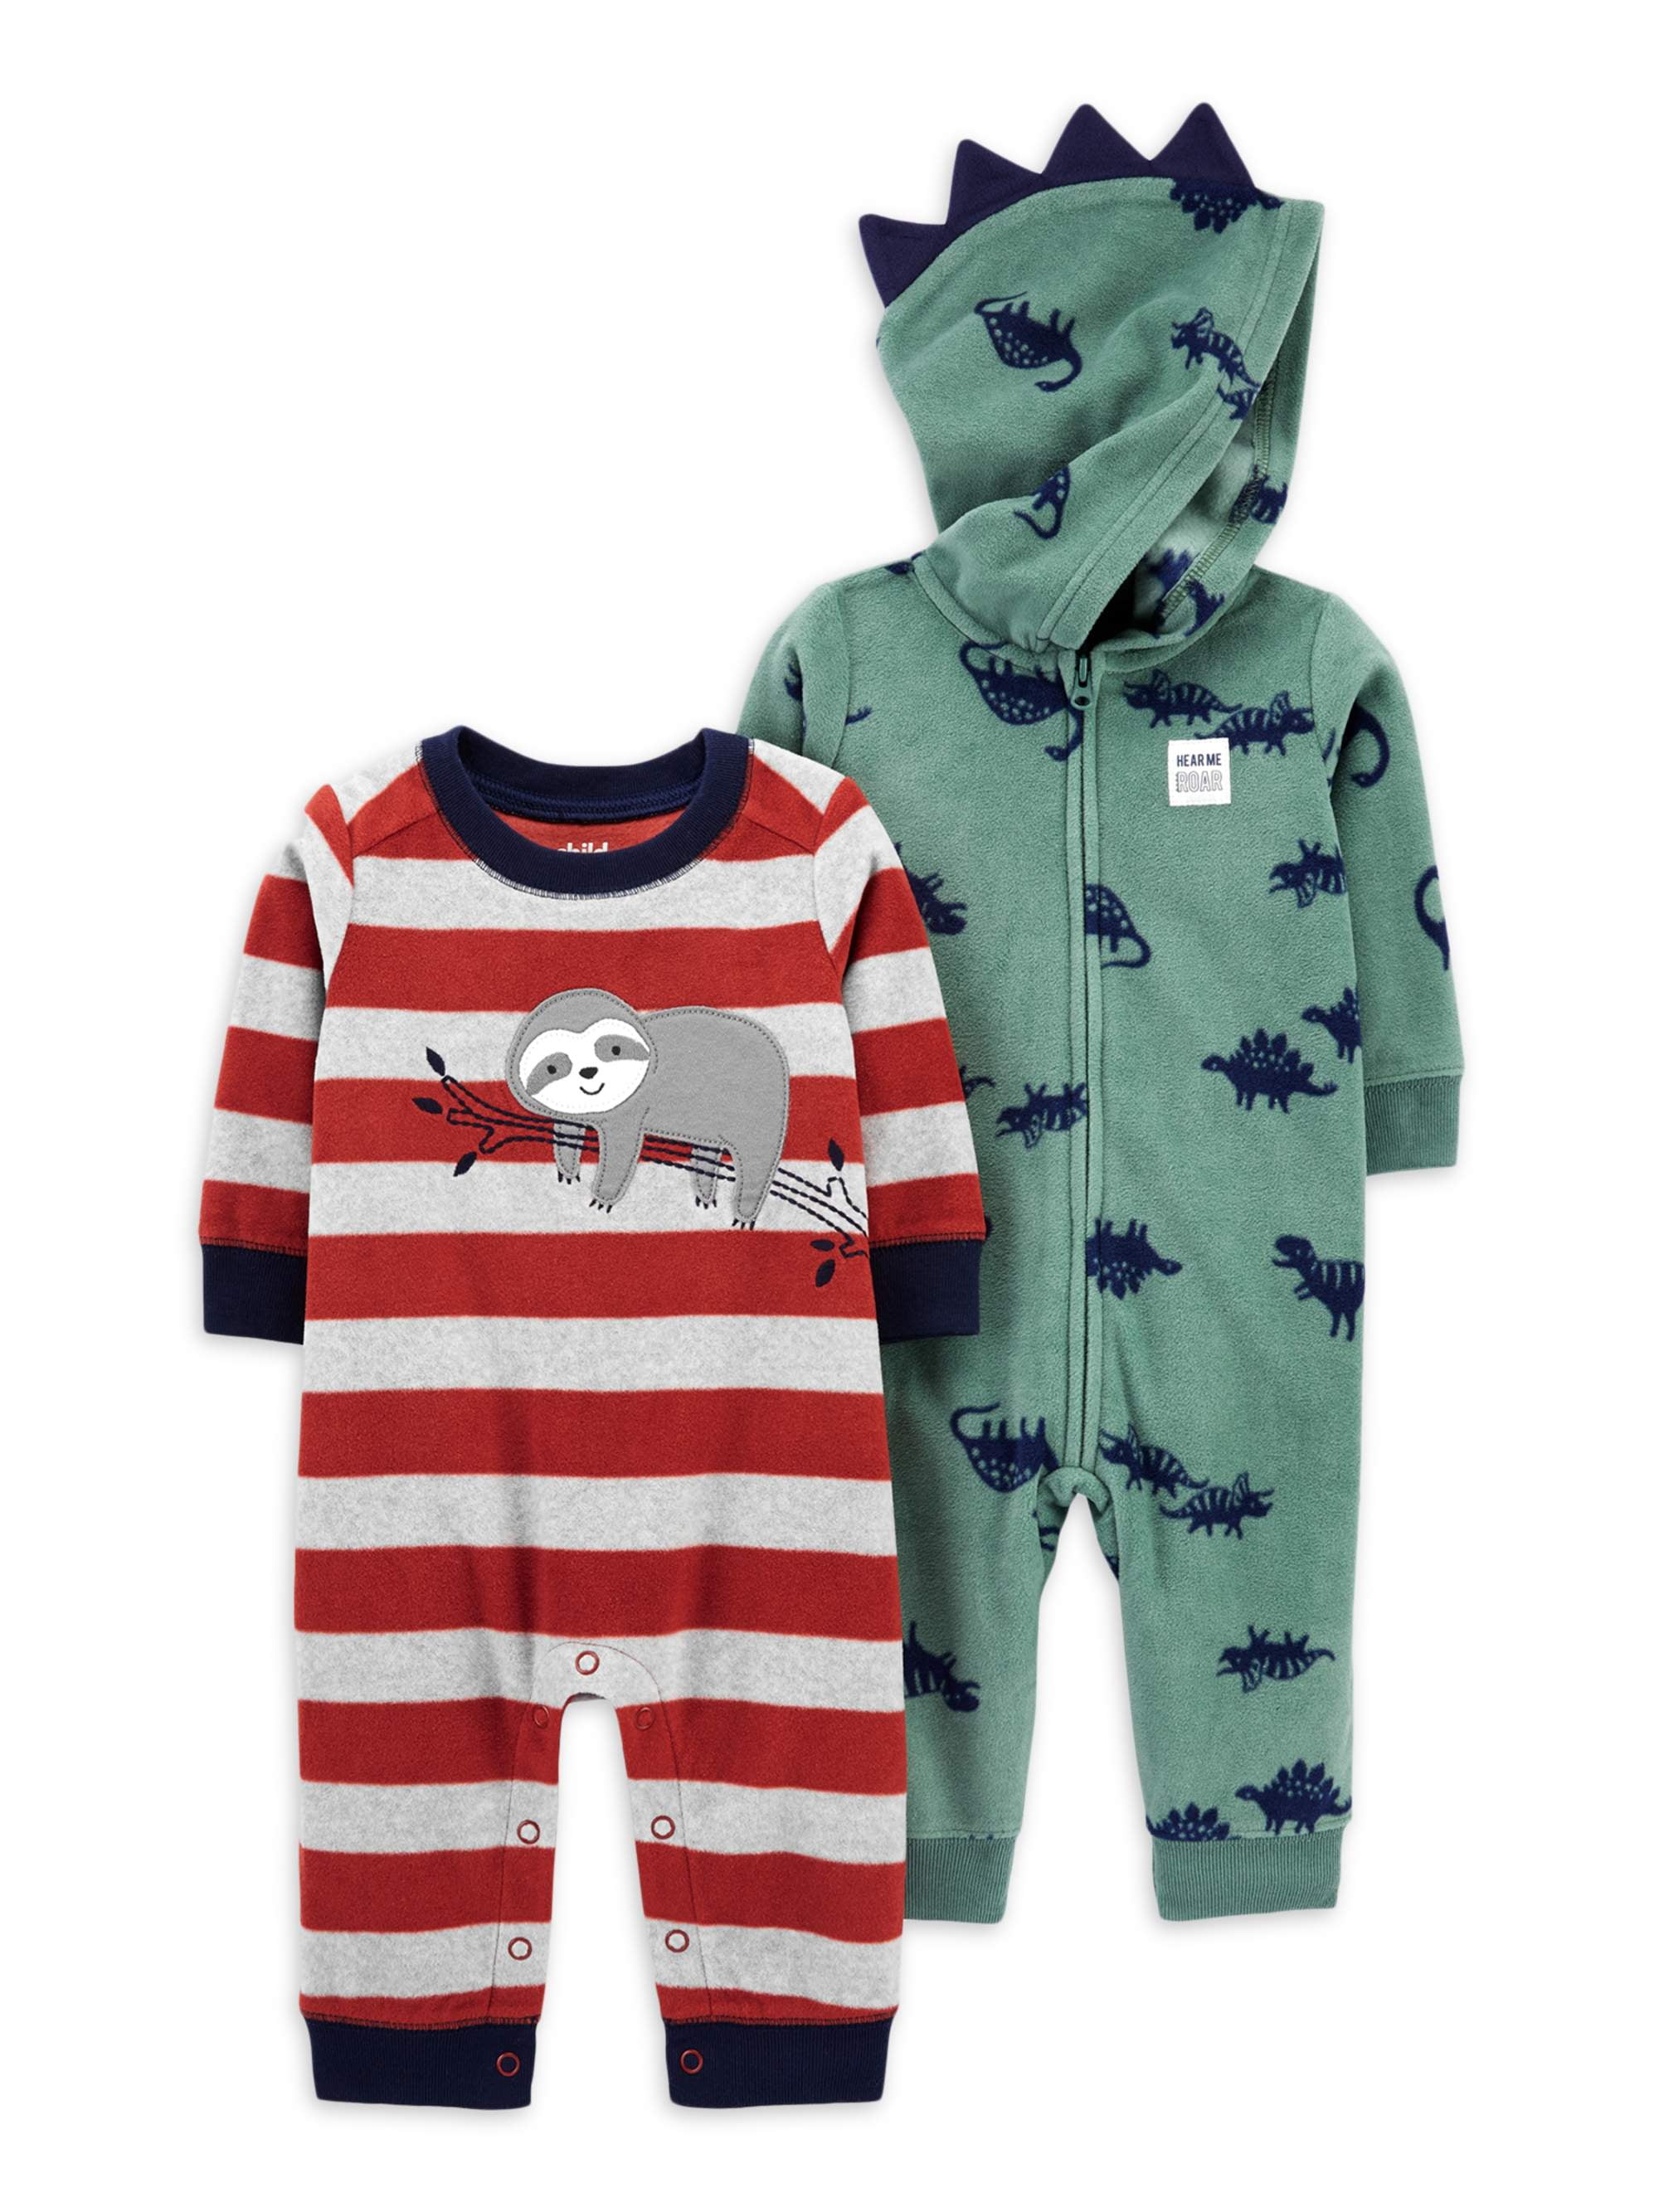 carters one piece outfits